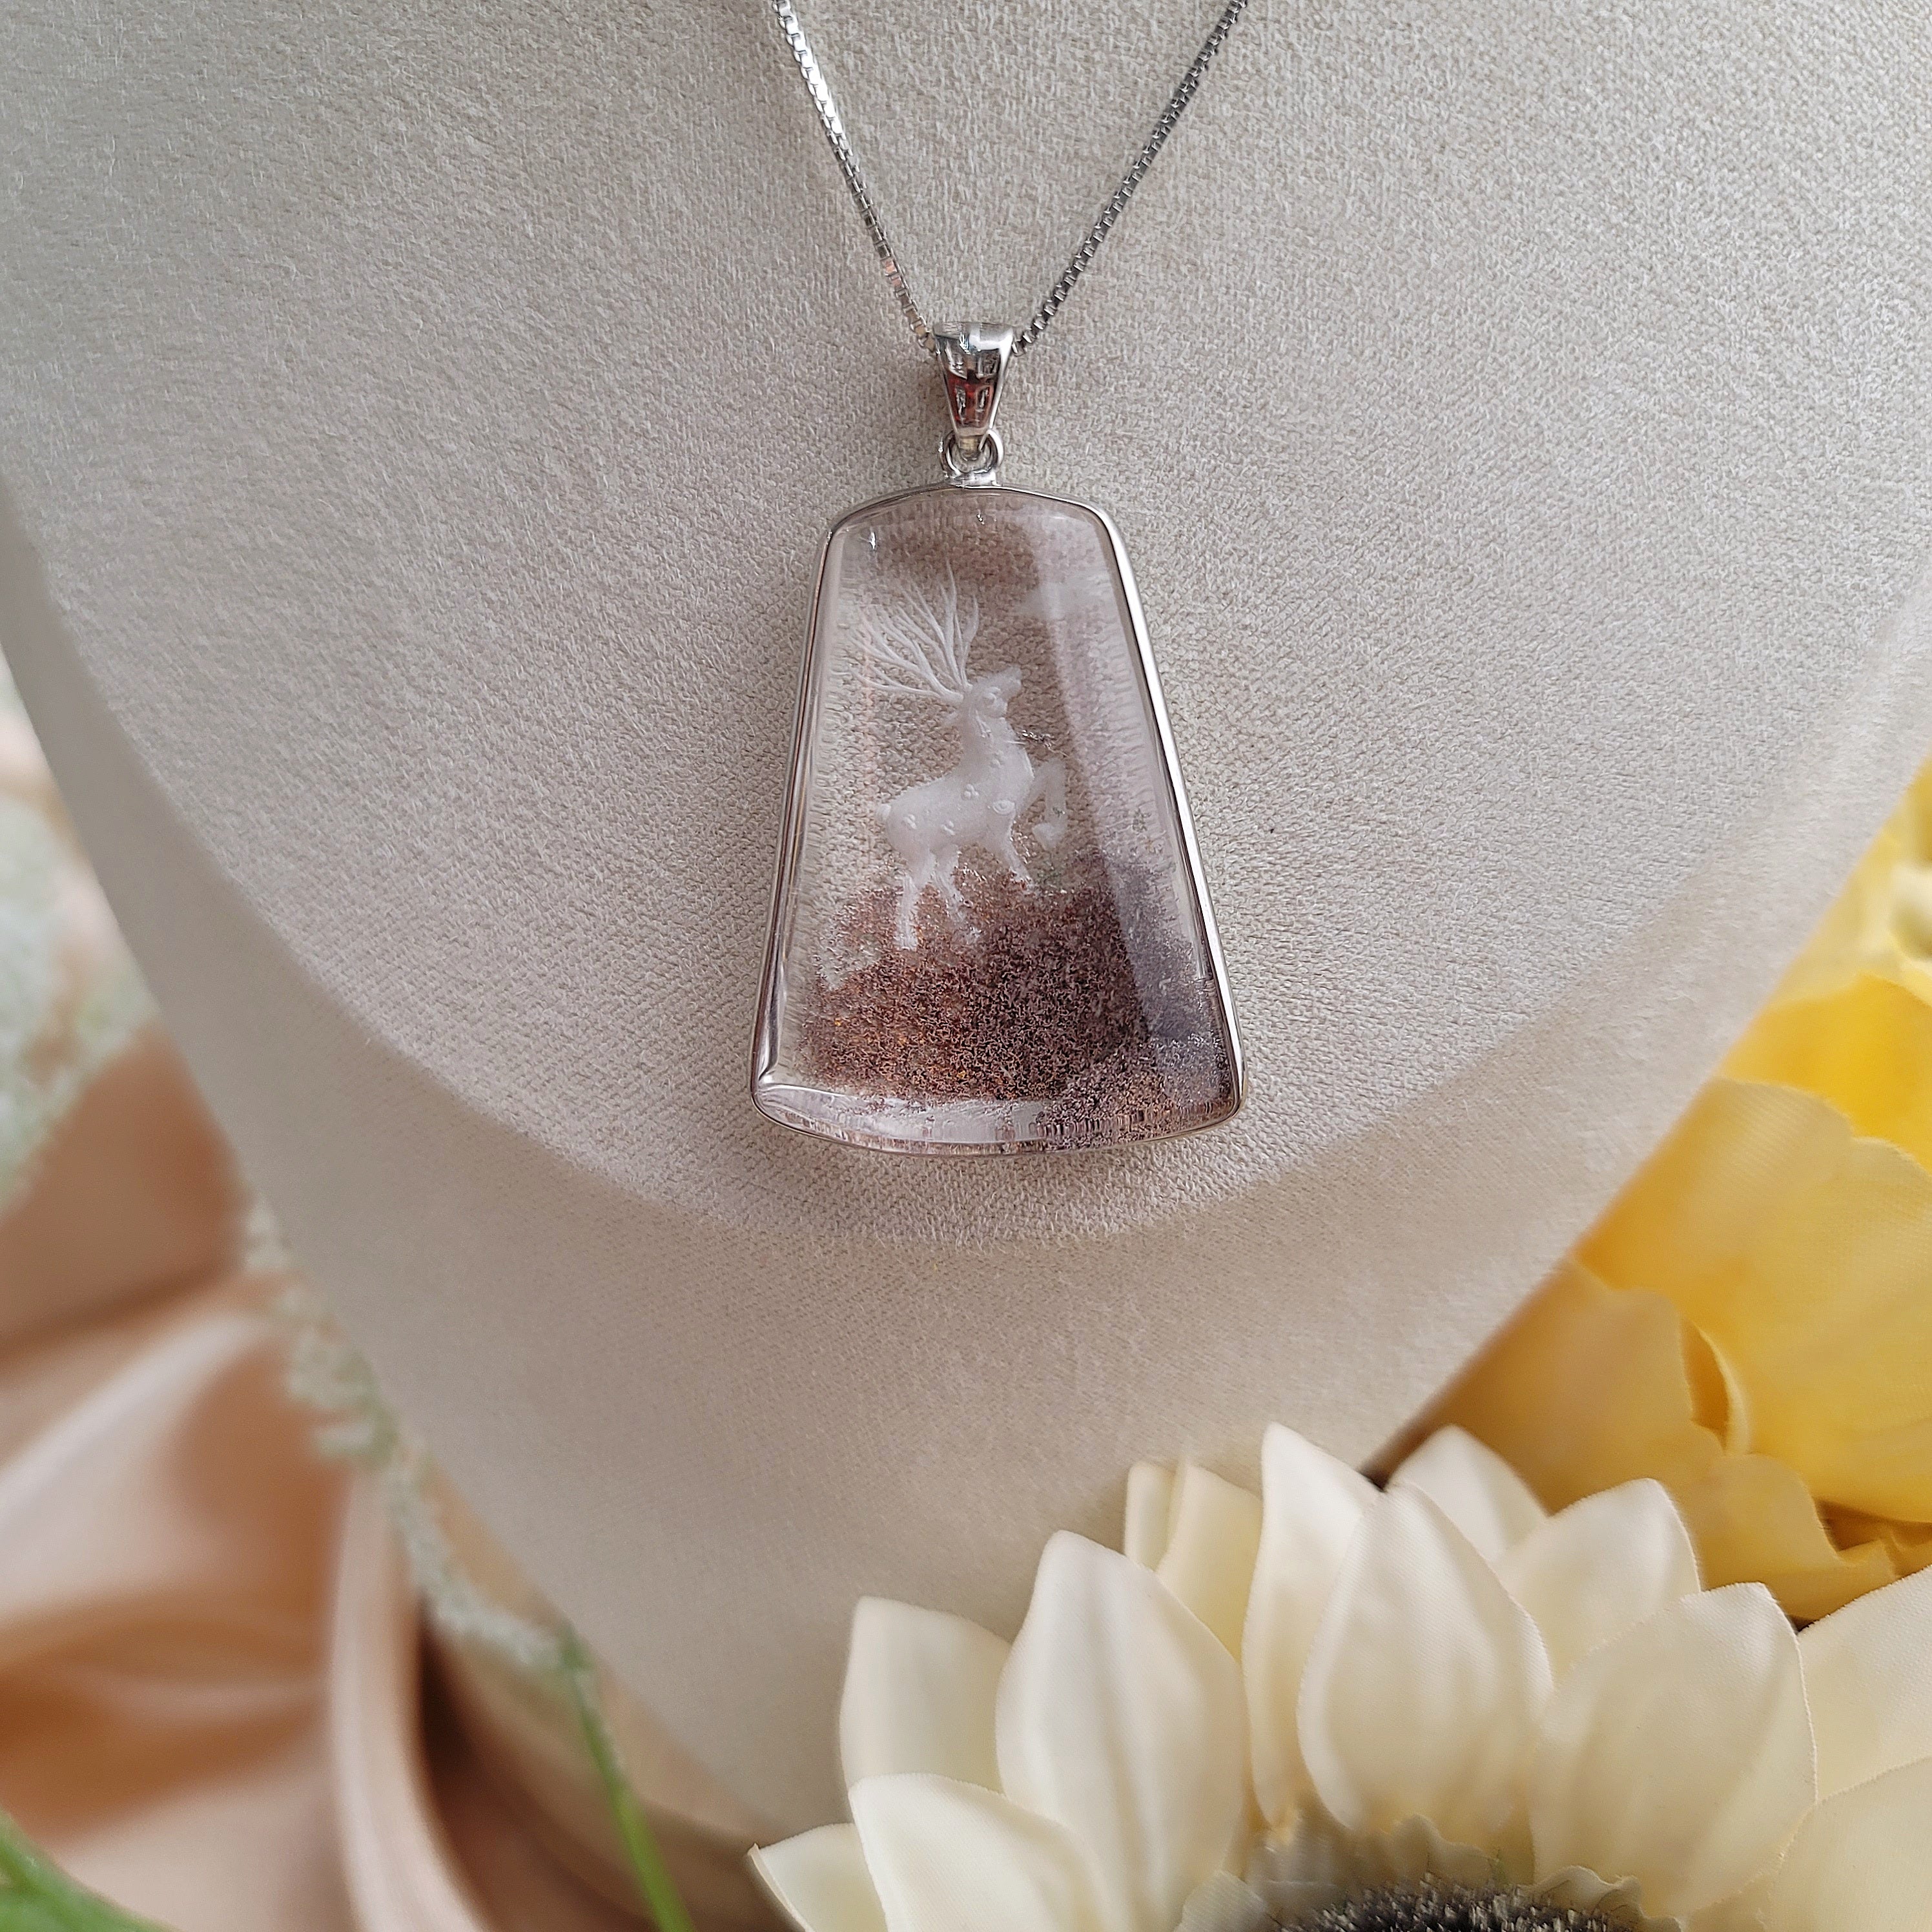 Garden Quartz Carved Necklace .925 Silver for Healing, Intention Setting and Manifesting